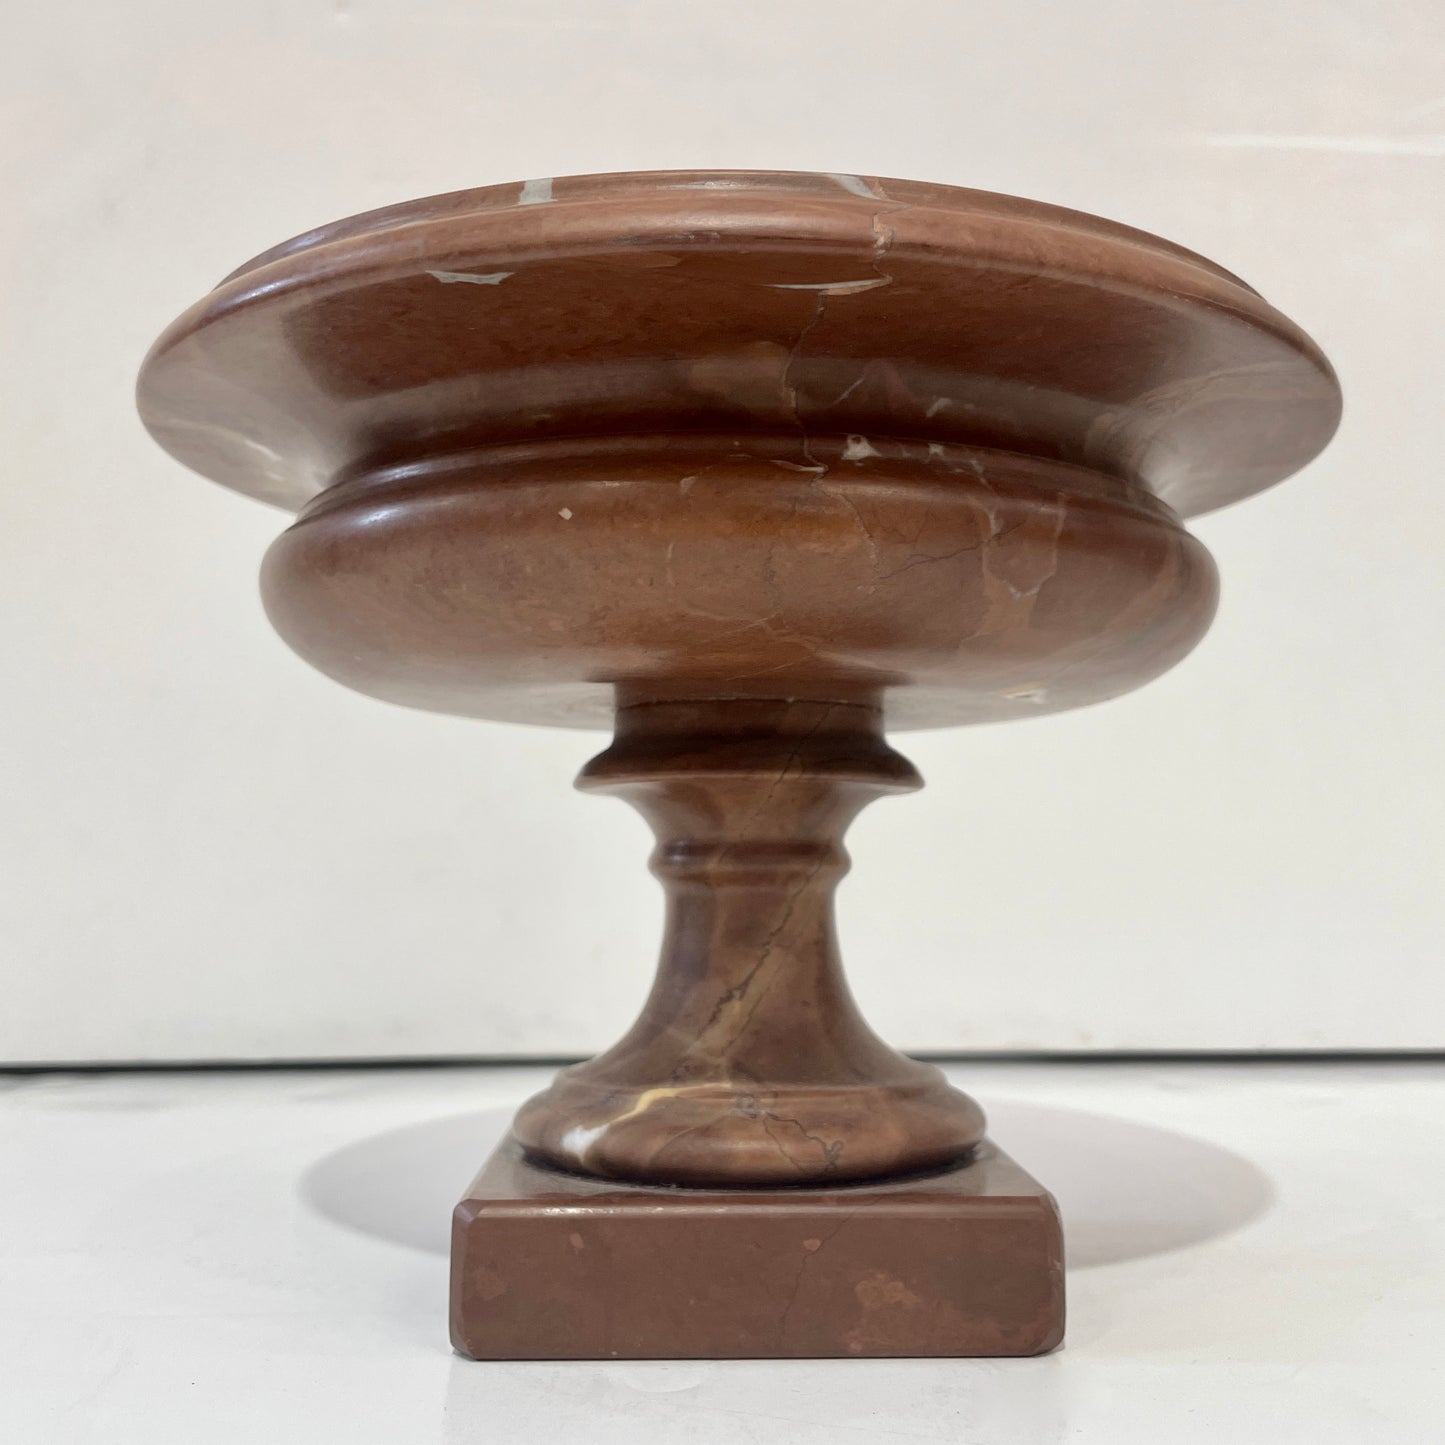 1930s Neoclassical Italian Carved Brown Red Marble Tazza Bowl with White Veins